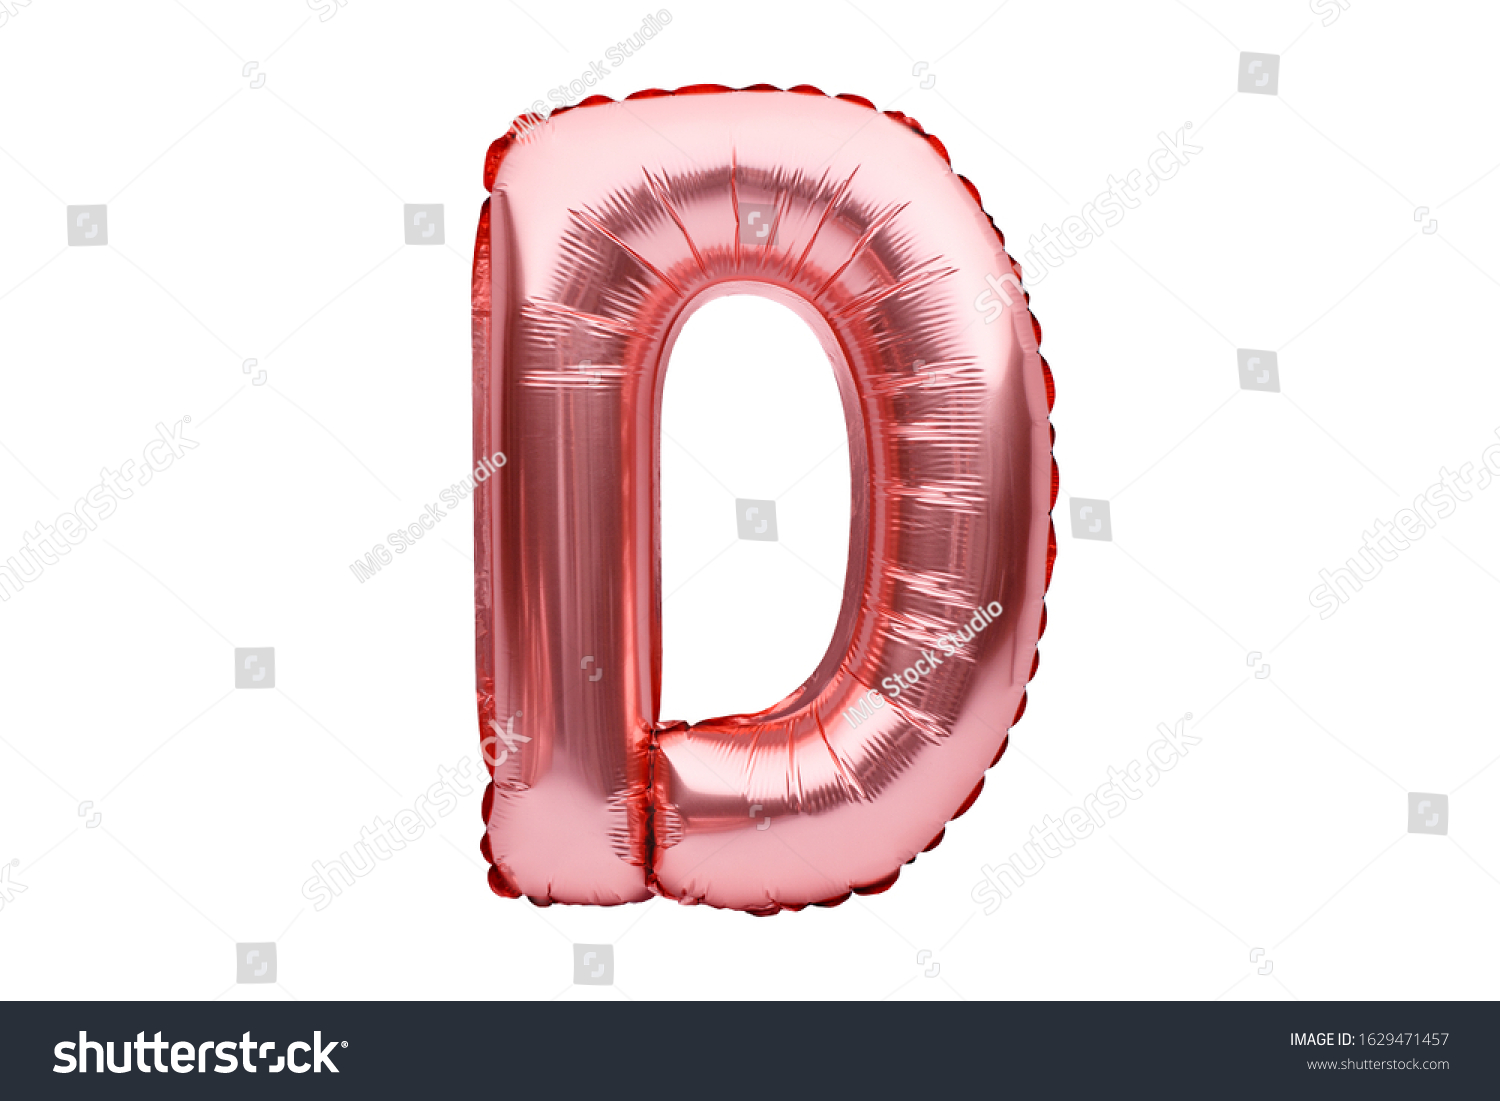 Letter D made of rose golden inflatable helium balloon isolated on white. Gold pink foil balloon font part of full alphabet set of upper case letters. #1629471457